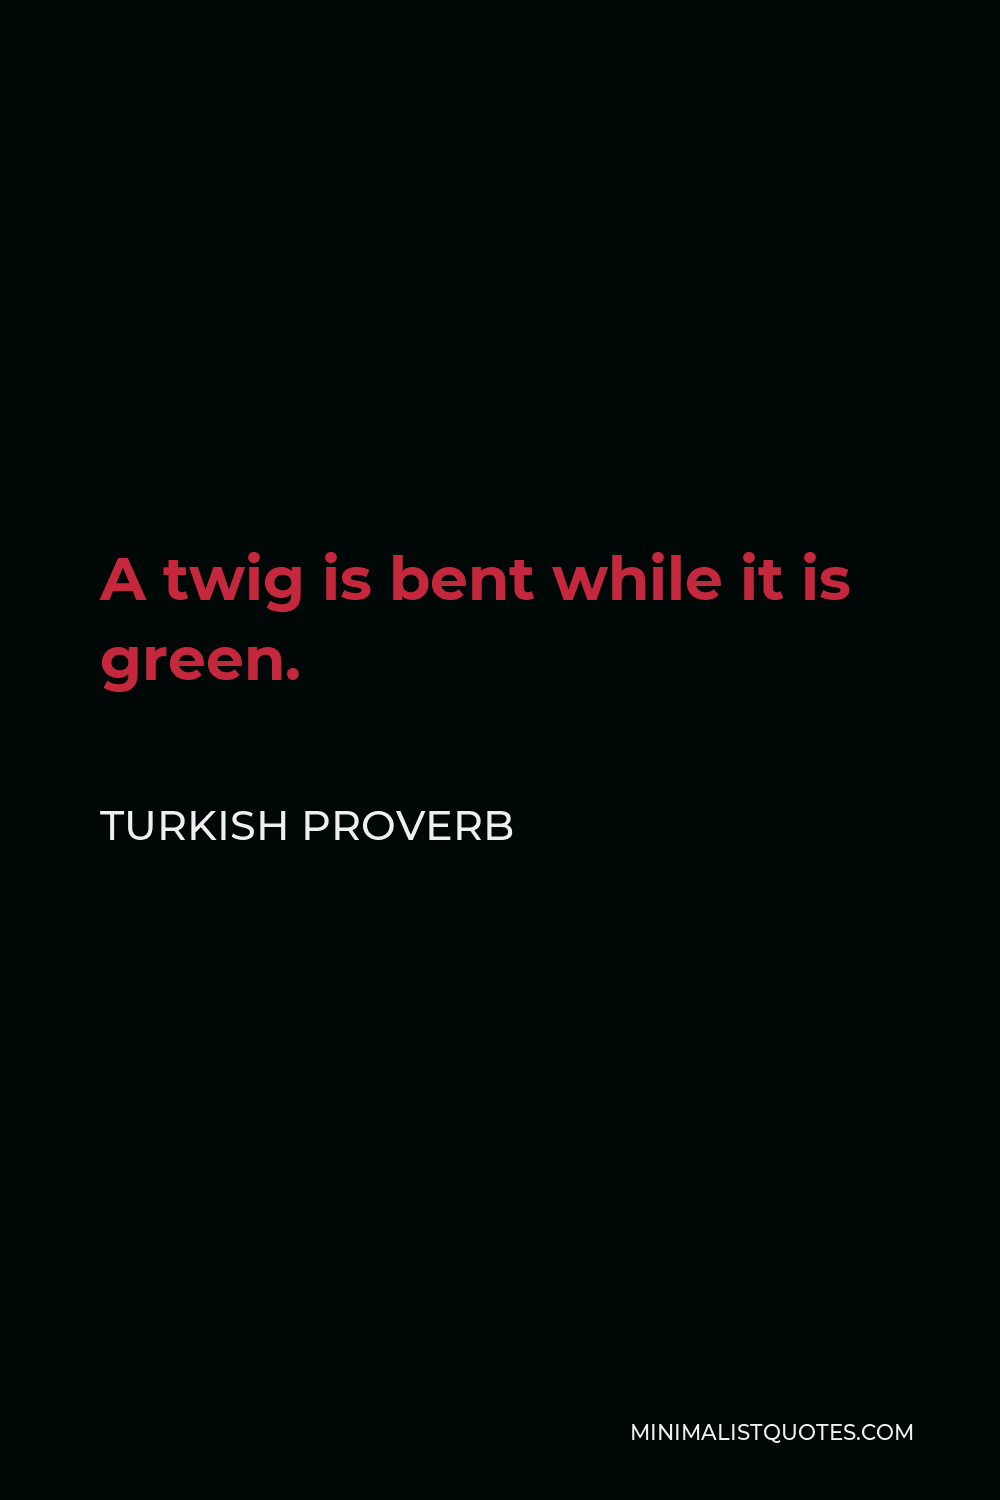 Turkish Proverb Quote - A twig is bent while it is green.